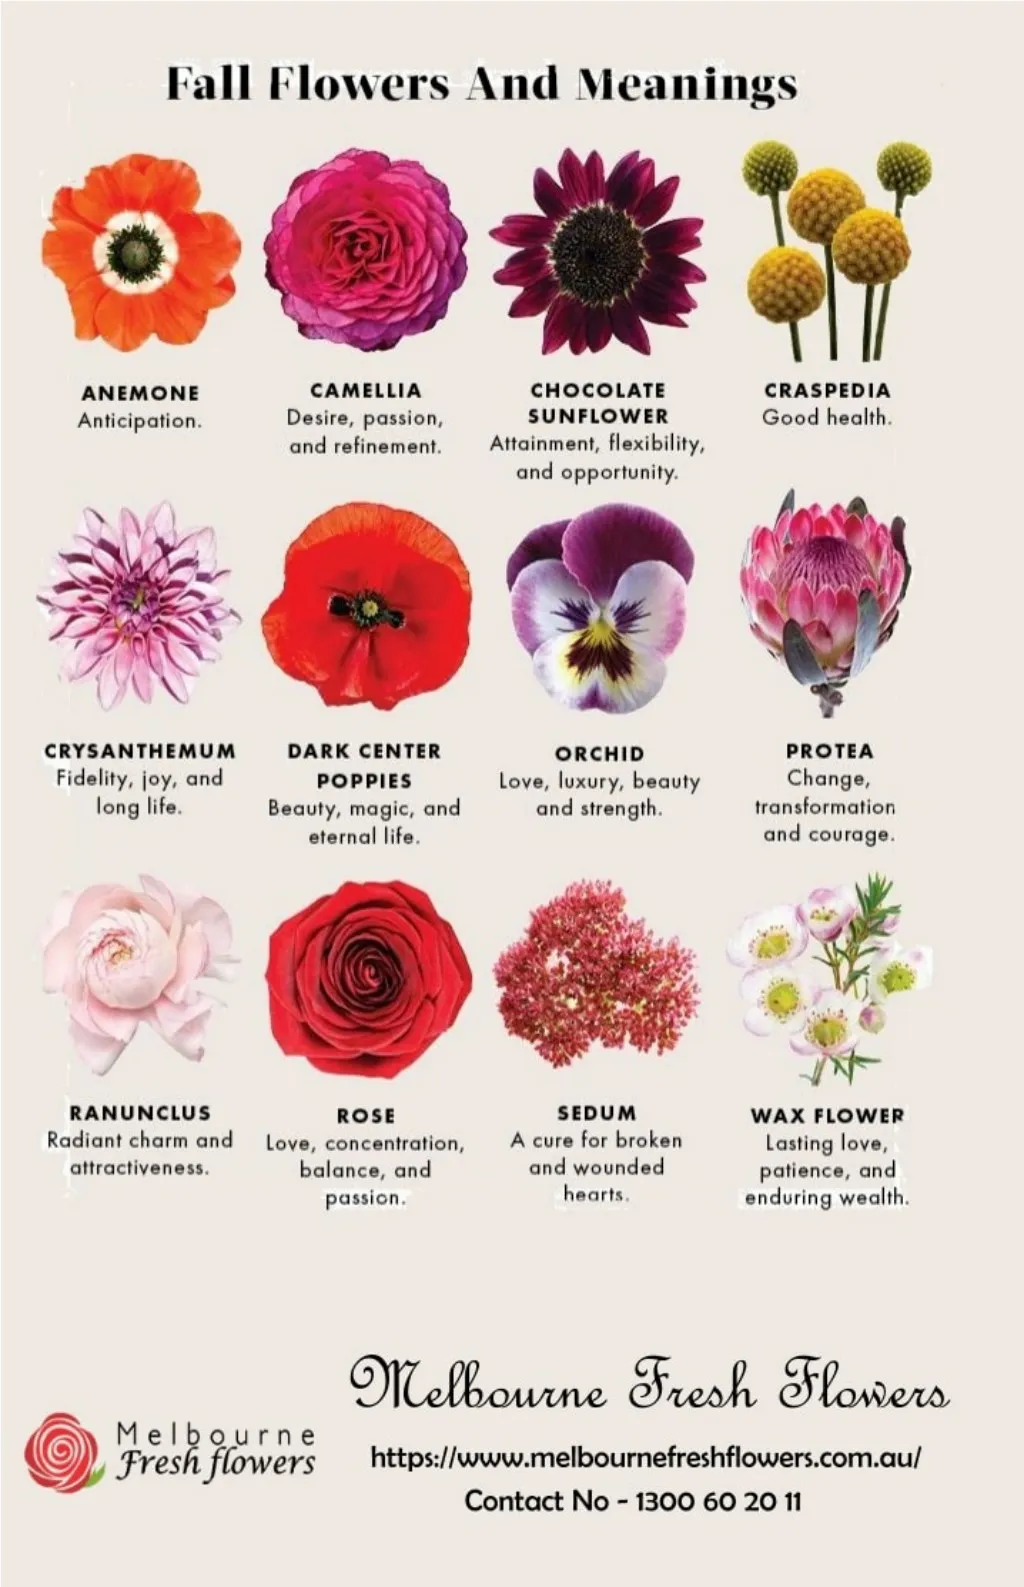 Flowers And Their Meanings With Pictures | Best Flower Site